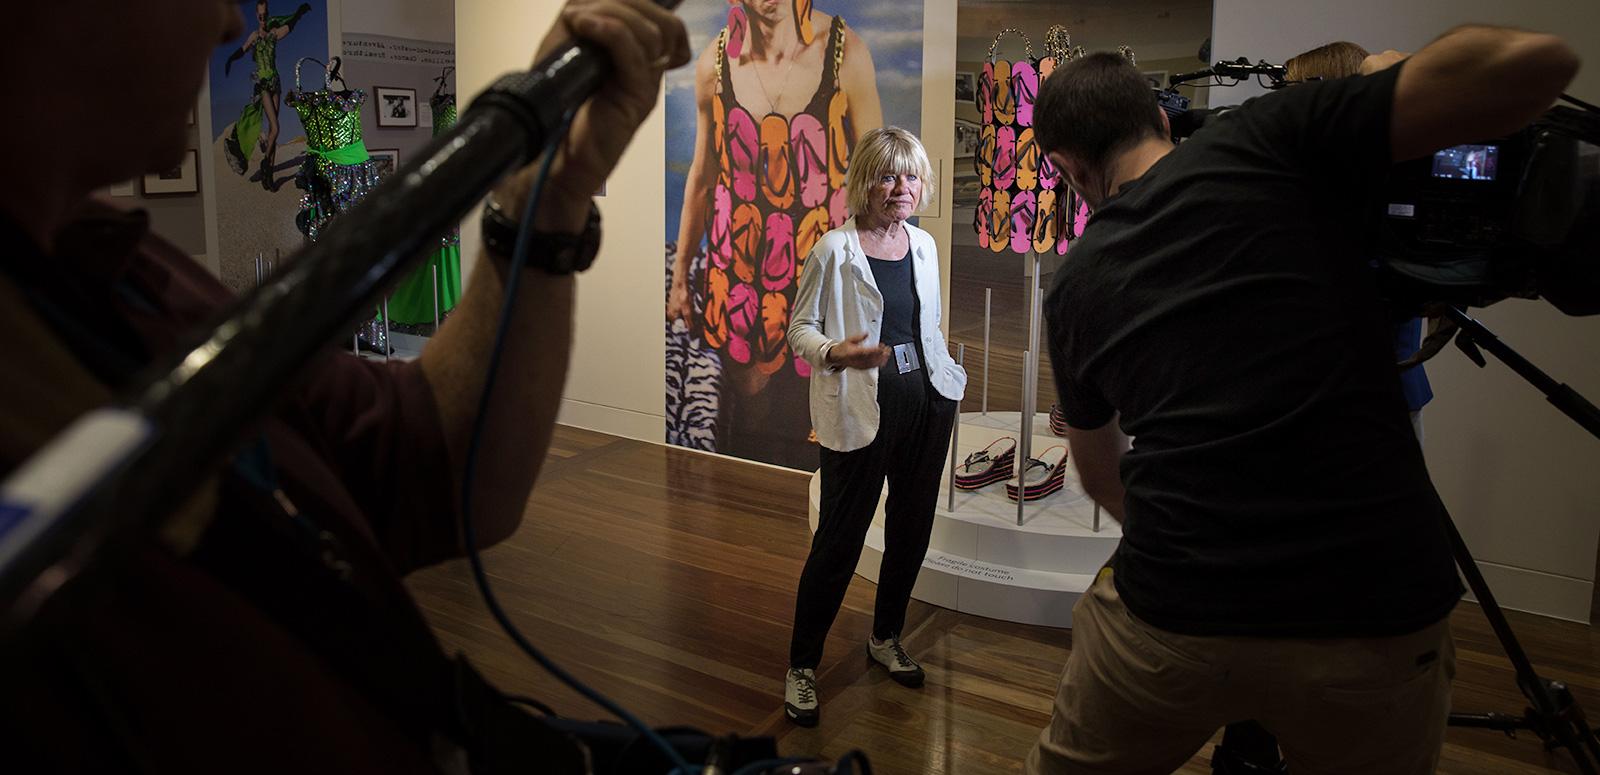 Margaret Pomeranz at the Starstruck exhibition. She's posing with the Priscilla thong dress for a TV crew.